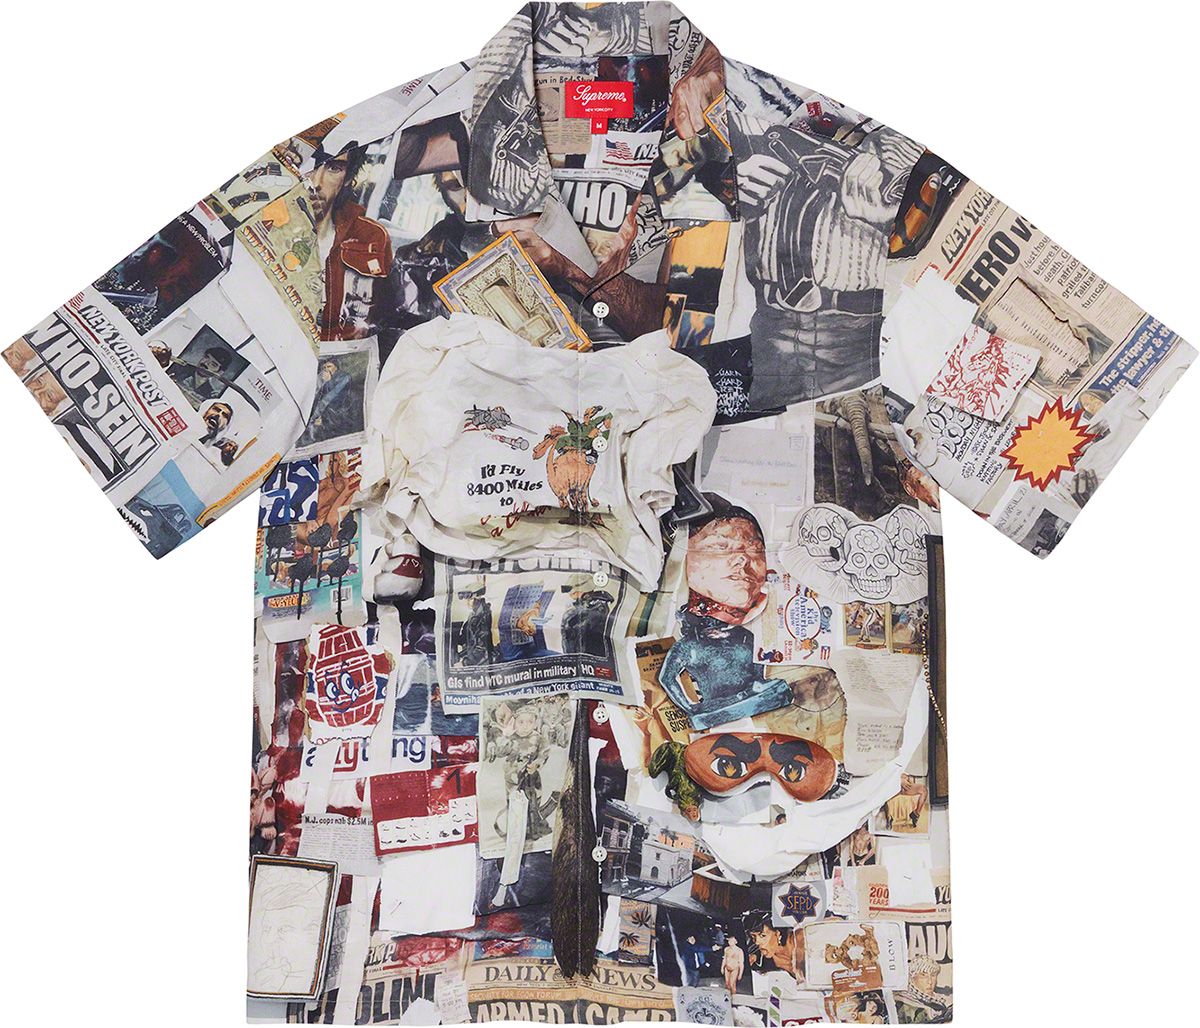 Dog S/S Work Shirt - Spring/Summer 2021 Preview – Supreme